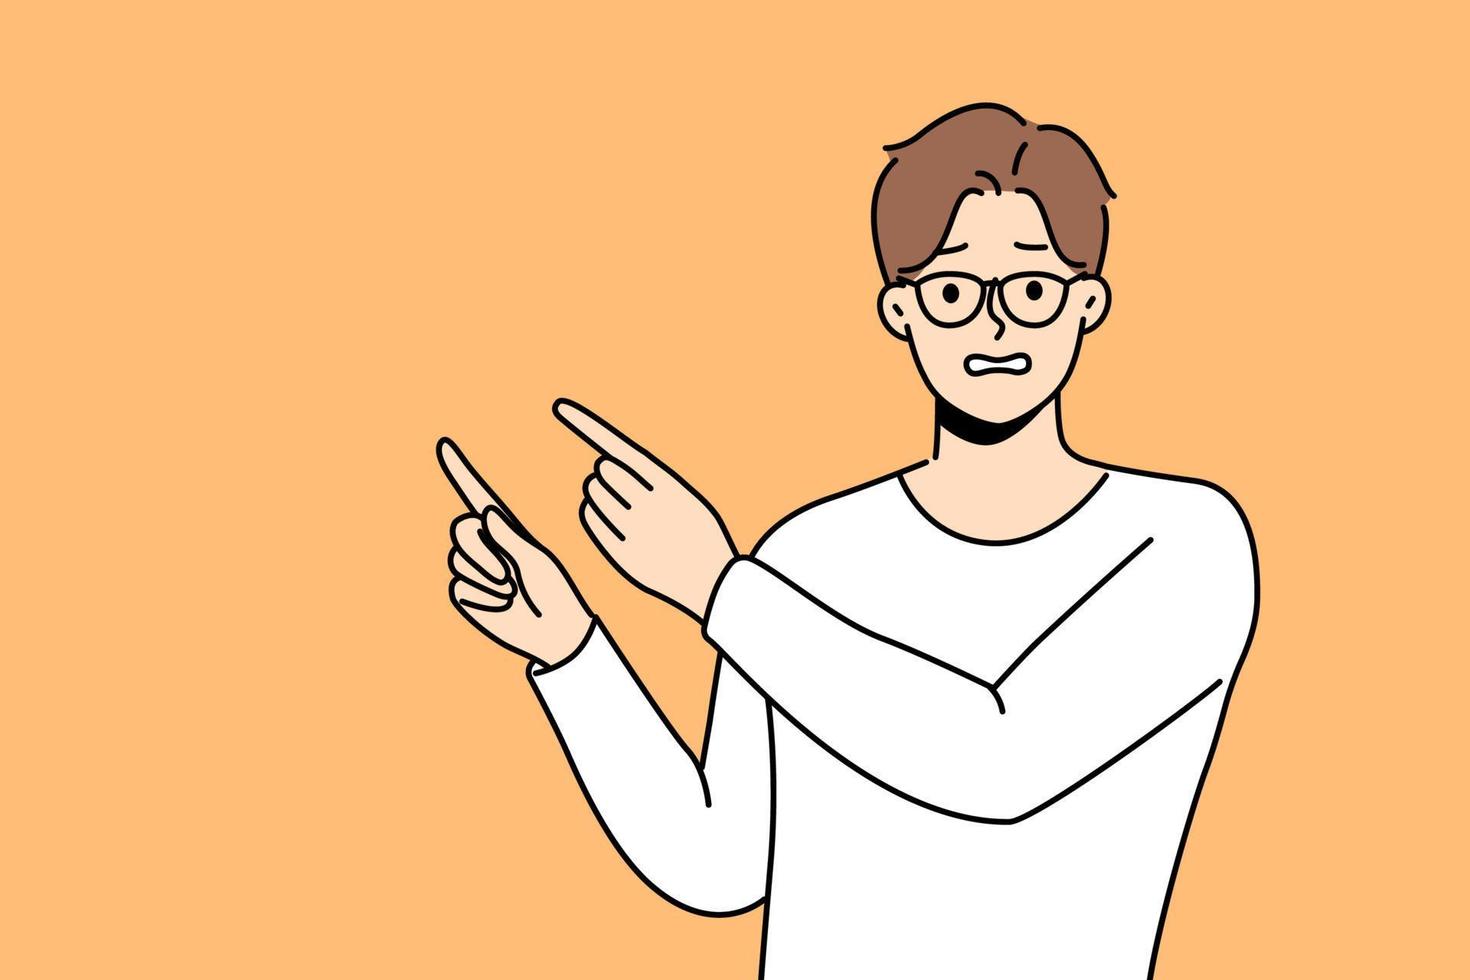 Frustrated man point with finger at empty advertising space. Confused unhappy guy recommend deal or offer feel awkward. Vector illustration.